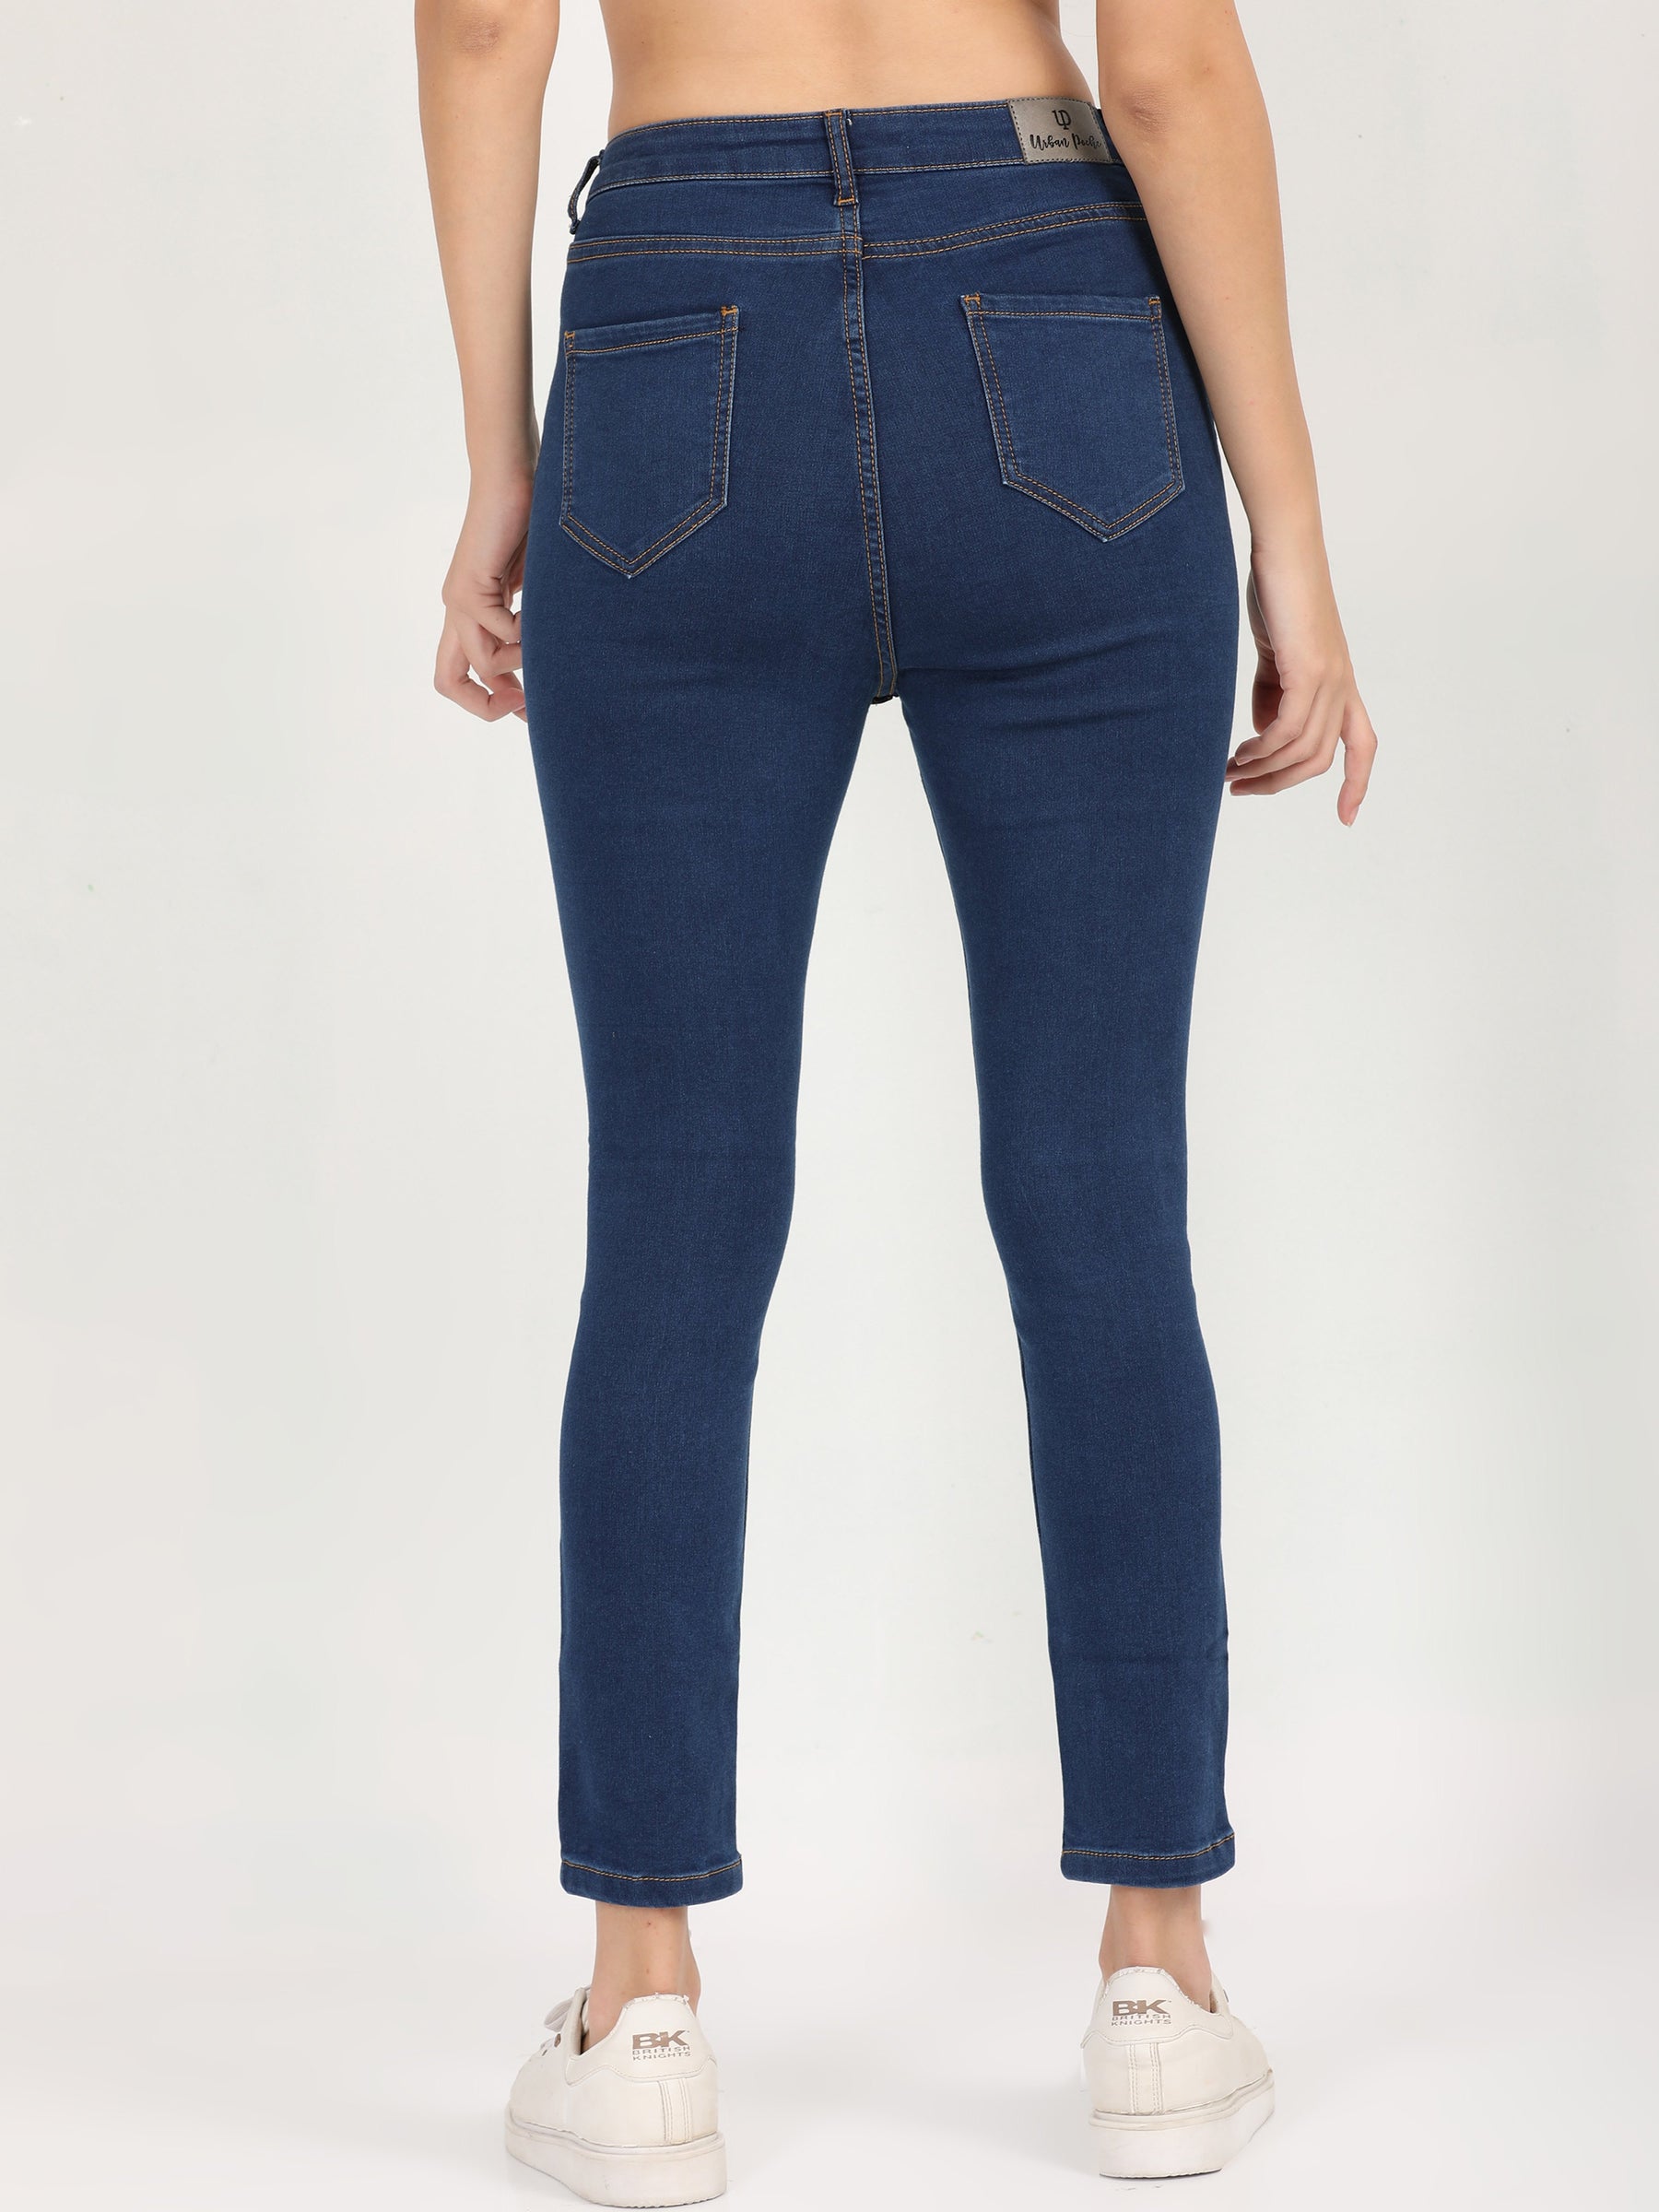 Skinny Blue High Waist Jeans Ankle Fit